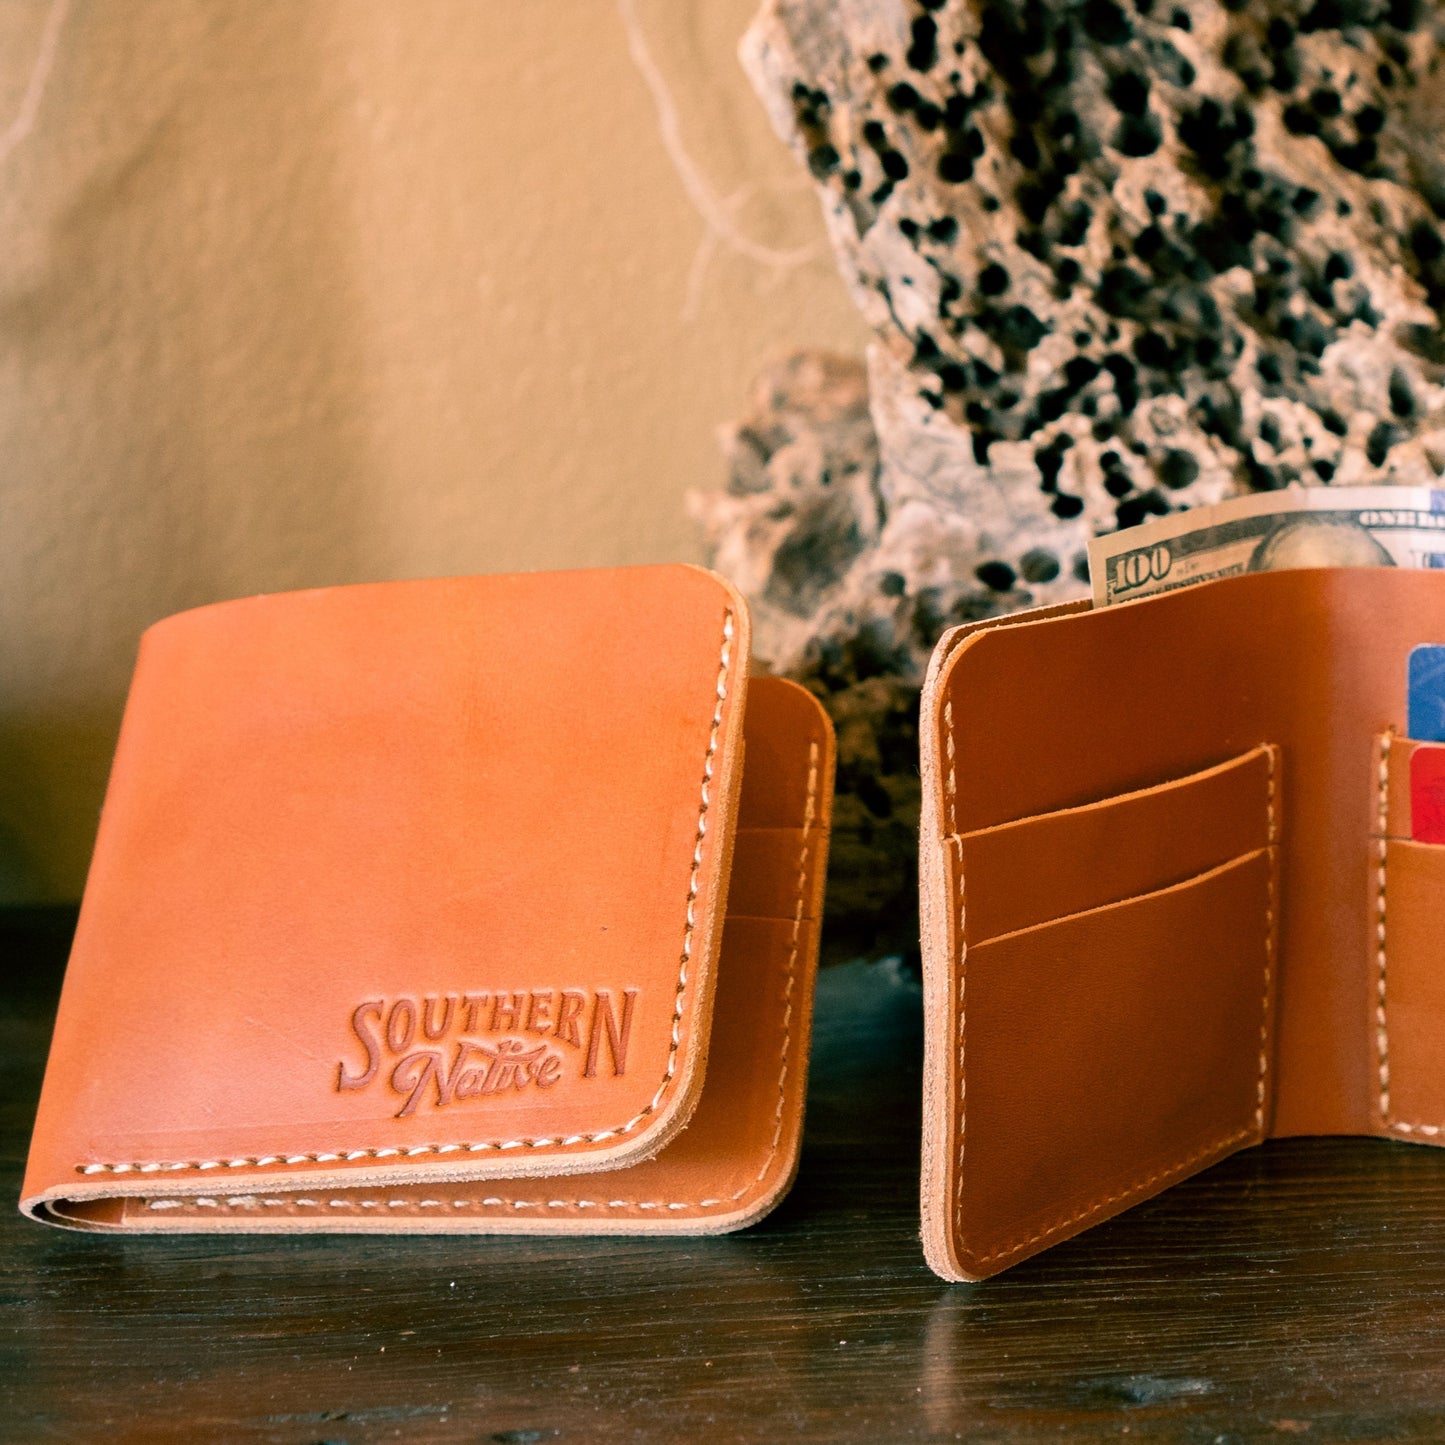 The Southern Native Wallet